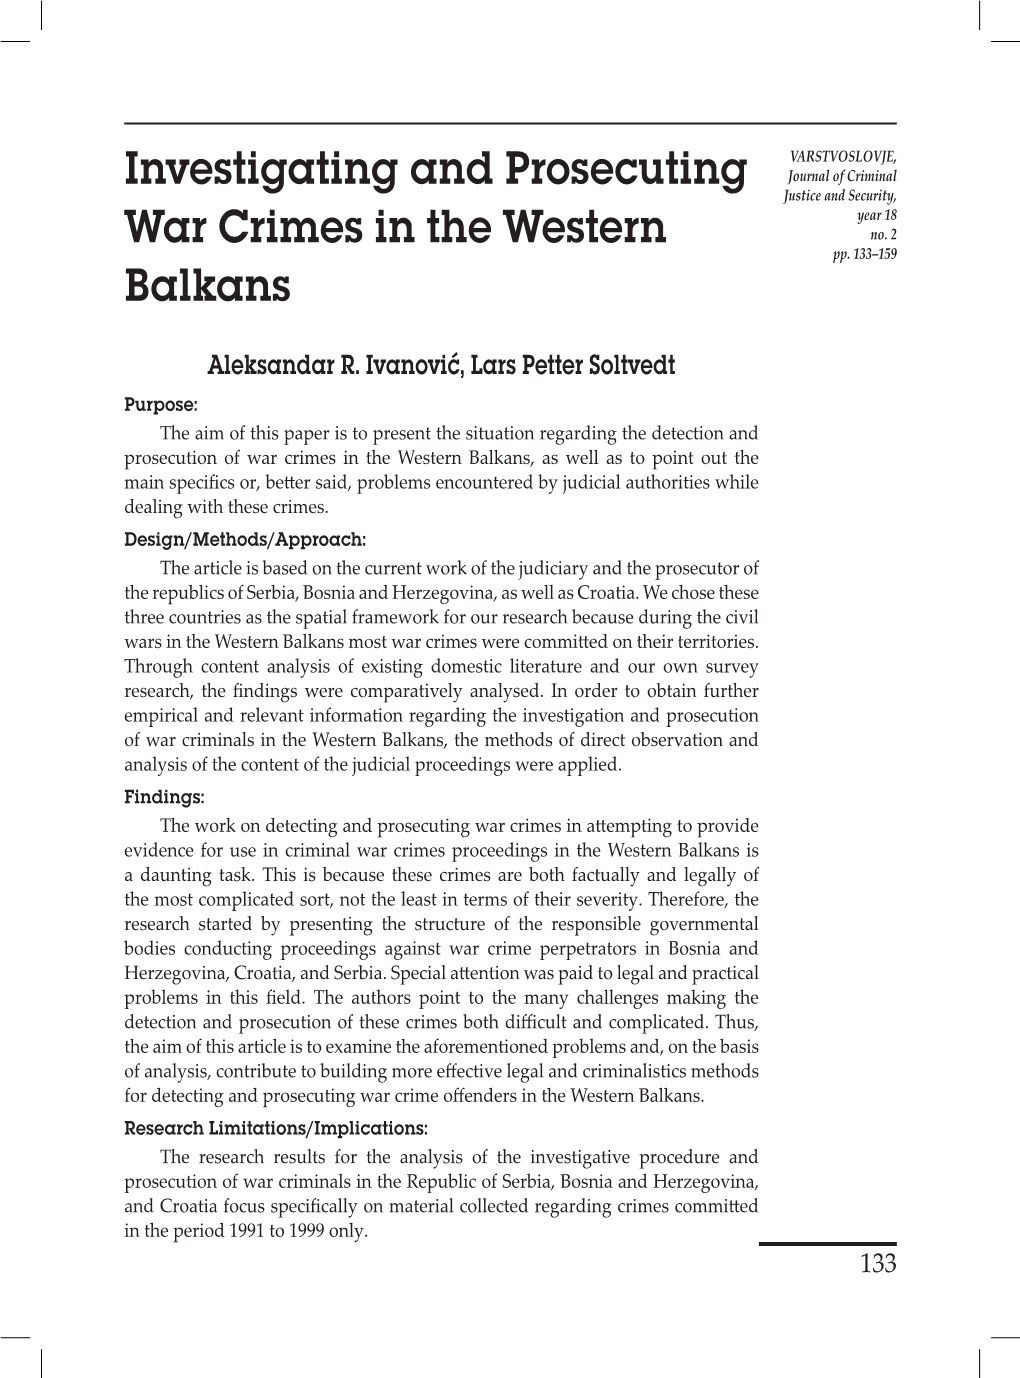 Investigating and Prosecuting War Crimes in the Western Balkans